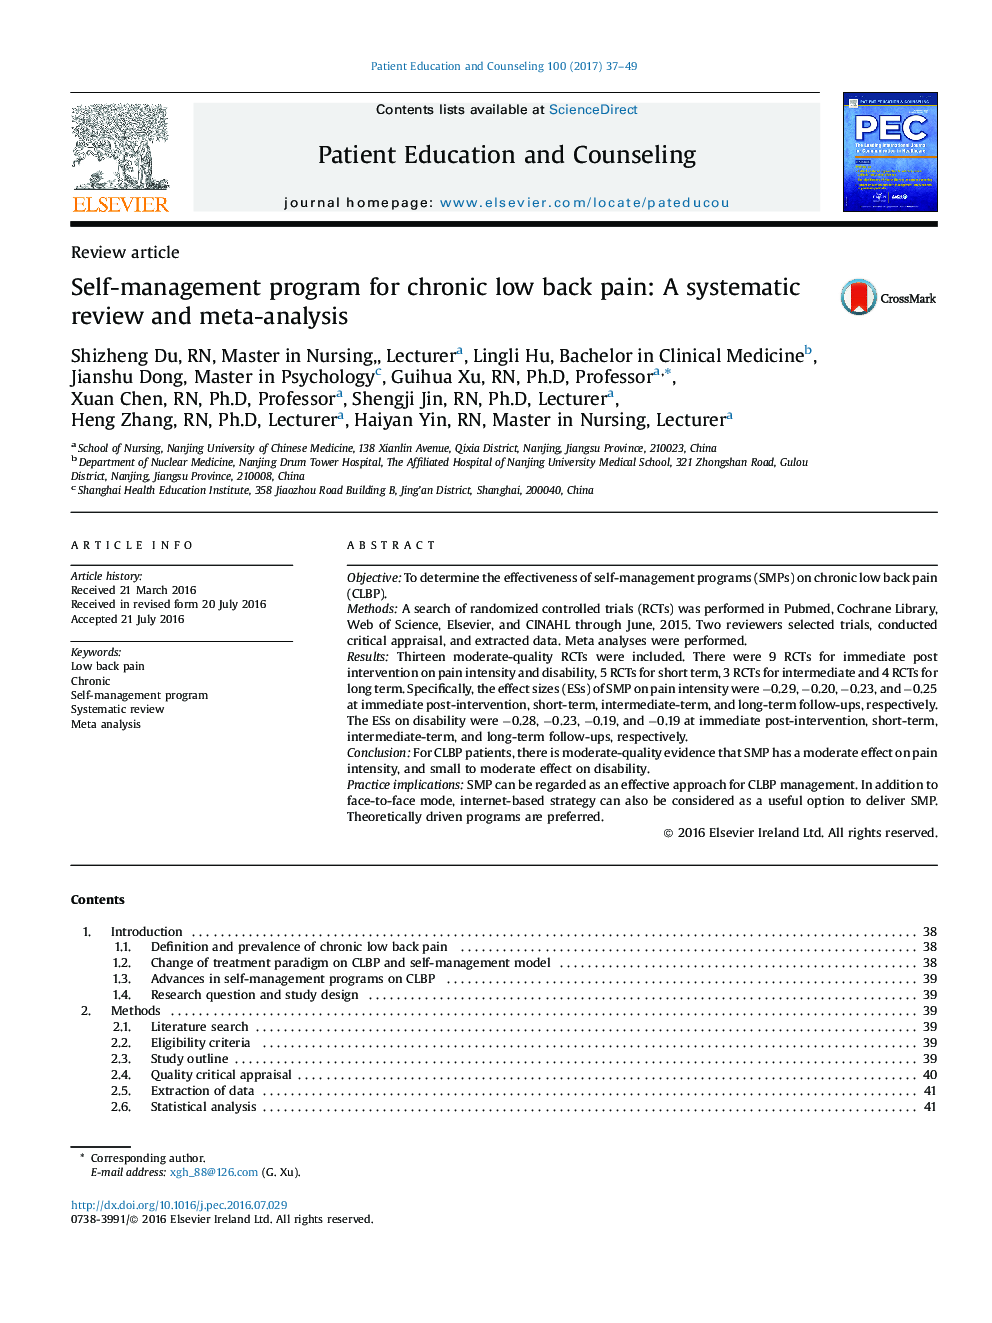 Self-management program for chronic low back pain: A systematic review and meta-analysis